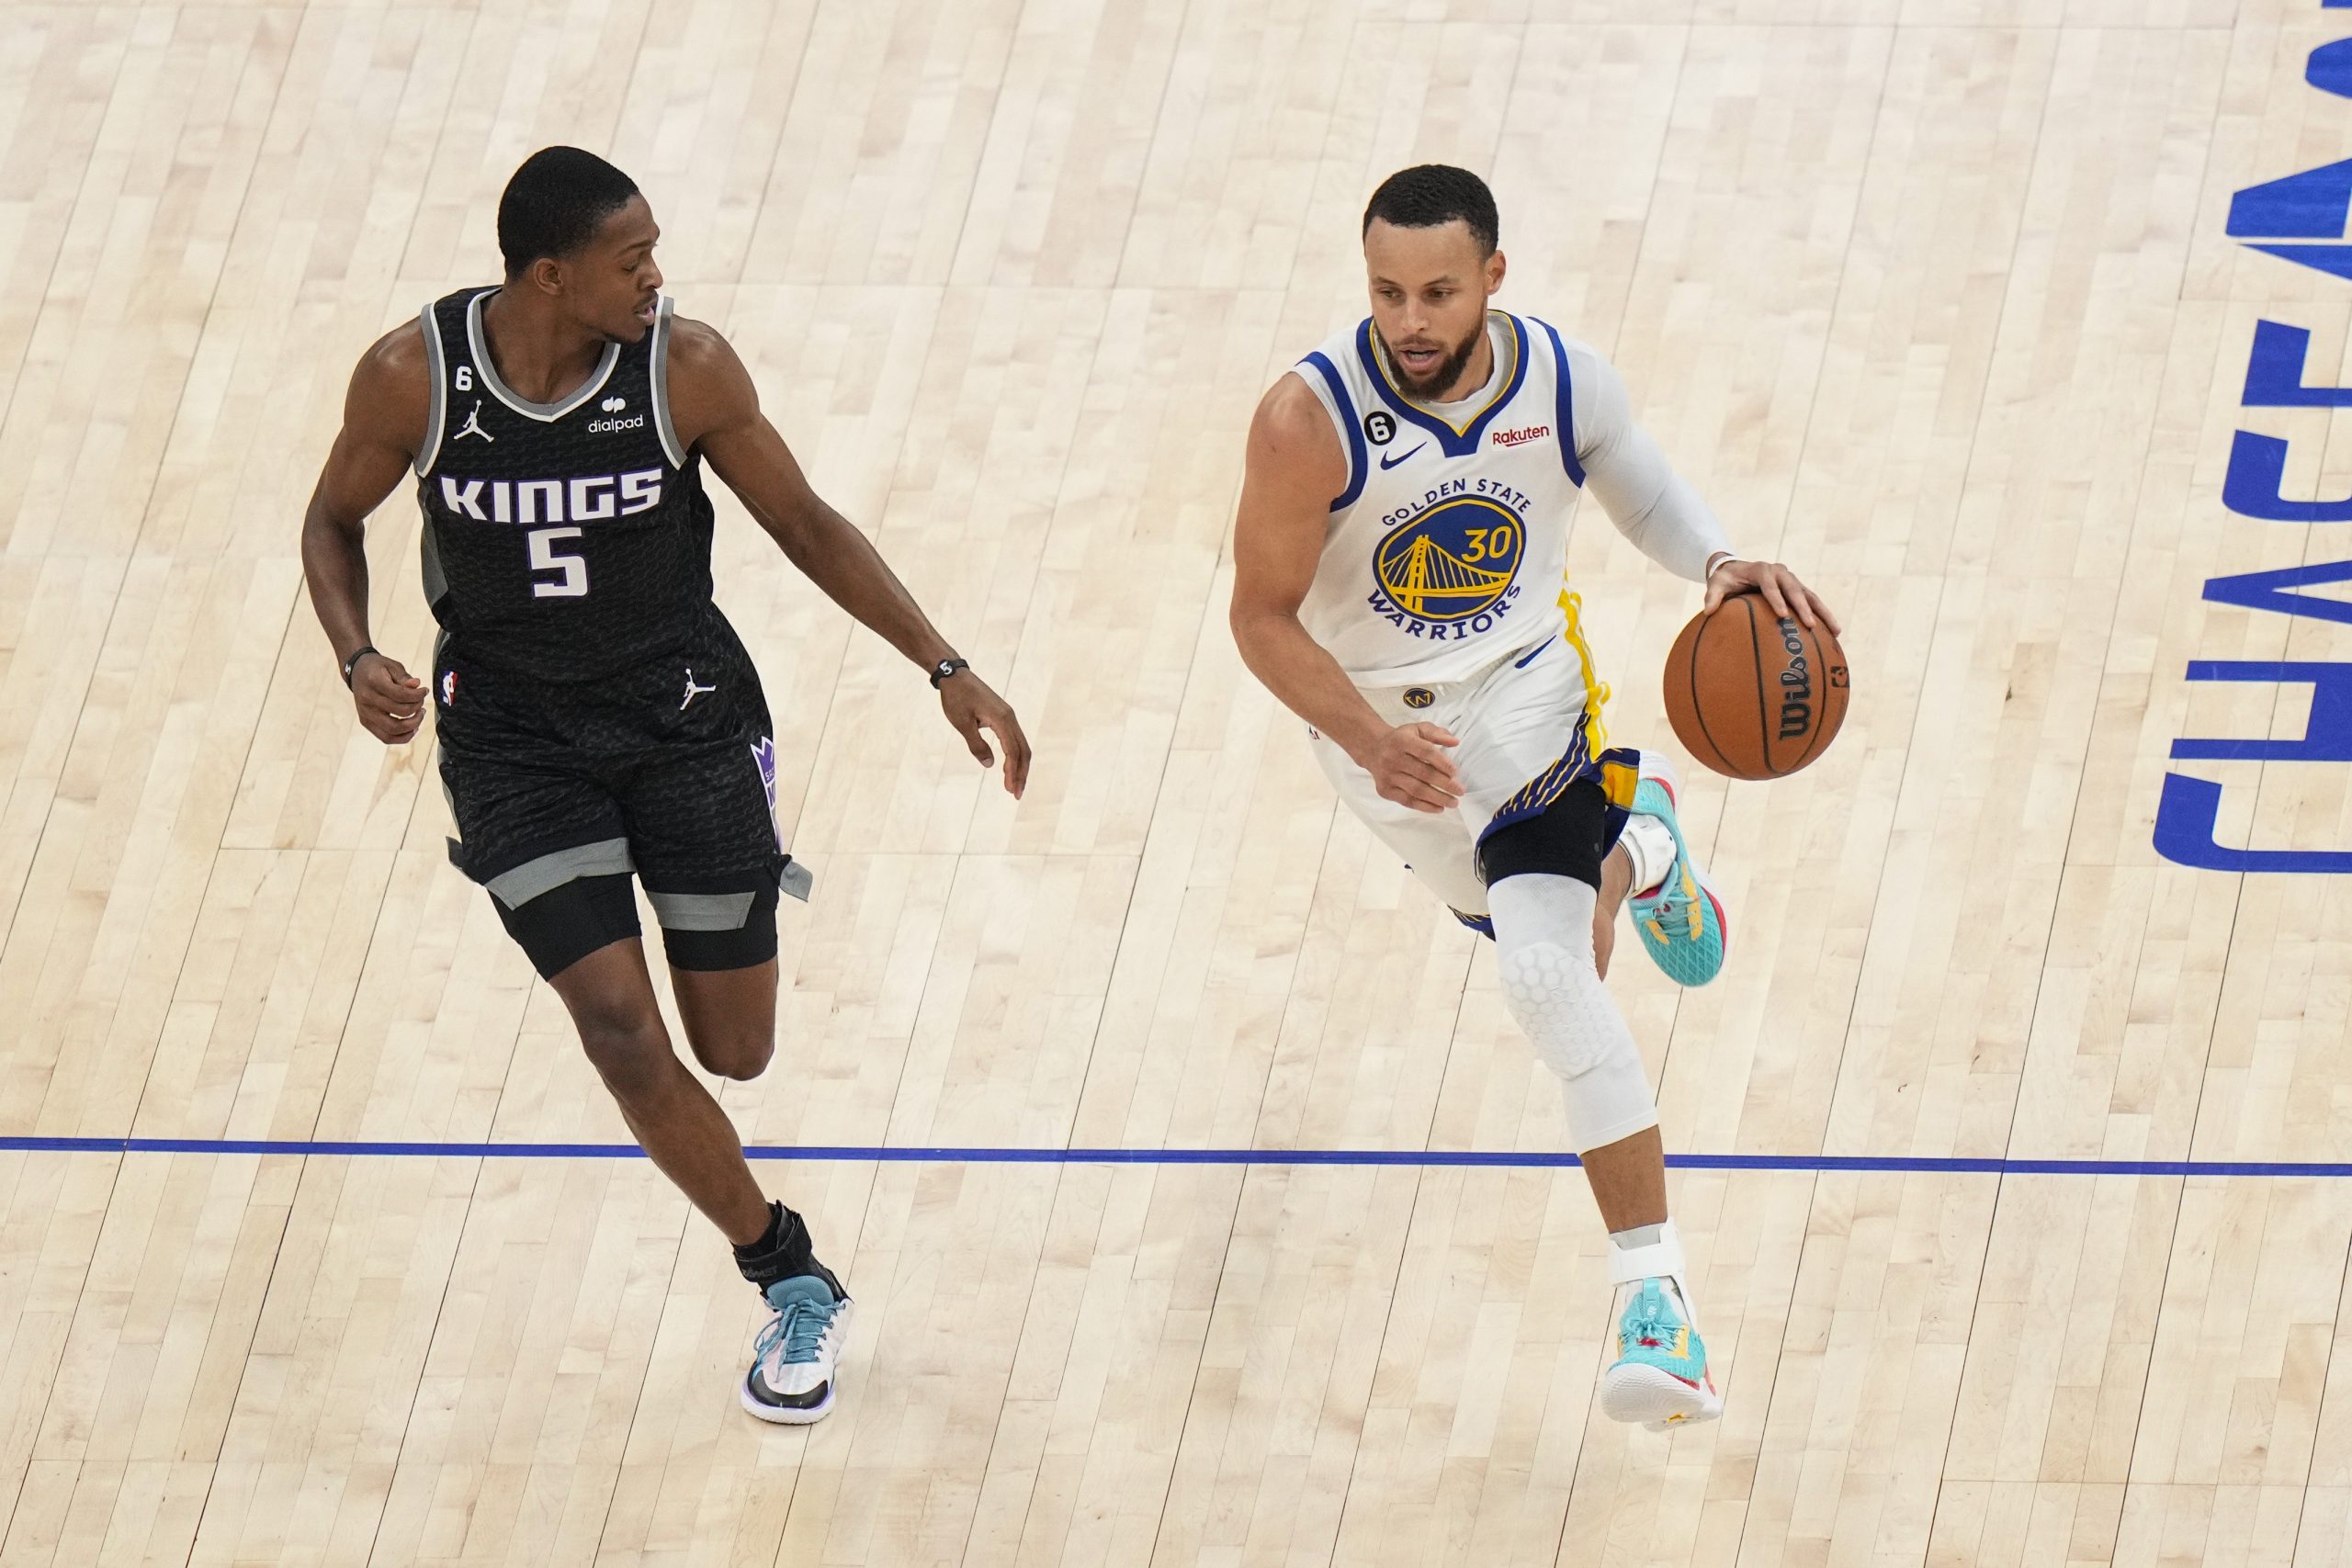 SAN FRANCISCO, CALIFORNIA - APRIL 23: Stephen Curry #30 of the Golden State Warriors dribbles the b...